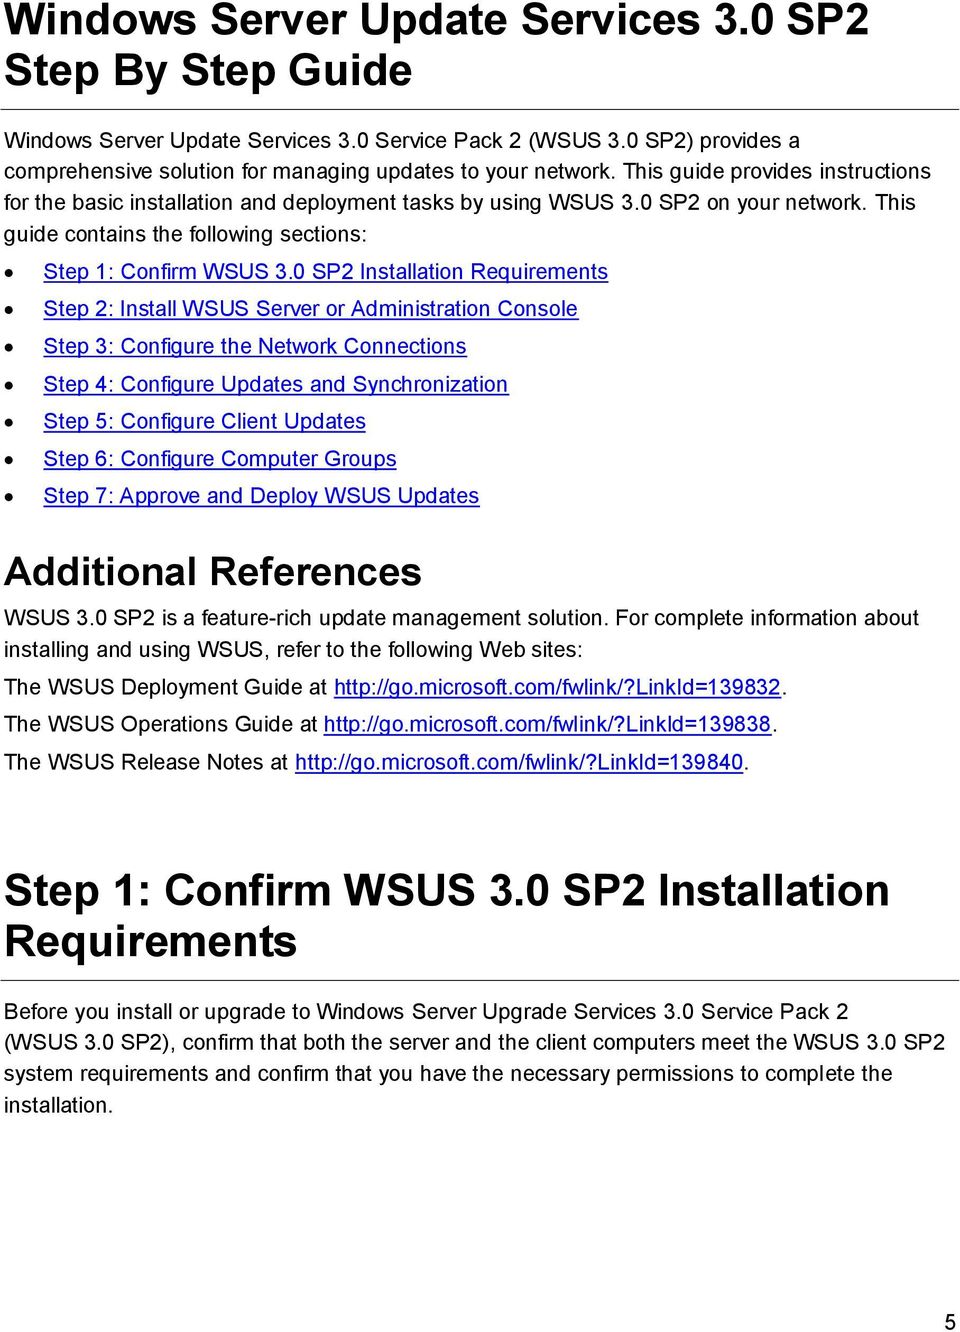 0 SP2 Installation Requirements Step 2: Install WSUS Server or Administration Console Step 3: Configure the Network Connections Step 4: Configure Updates and Synchronization Step 5: Configure Client